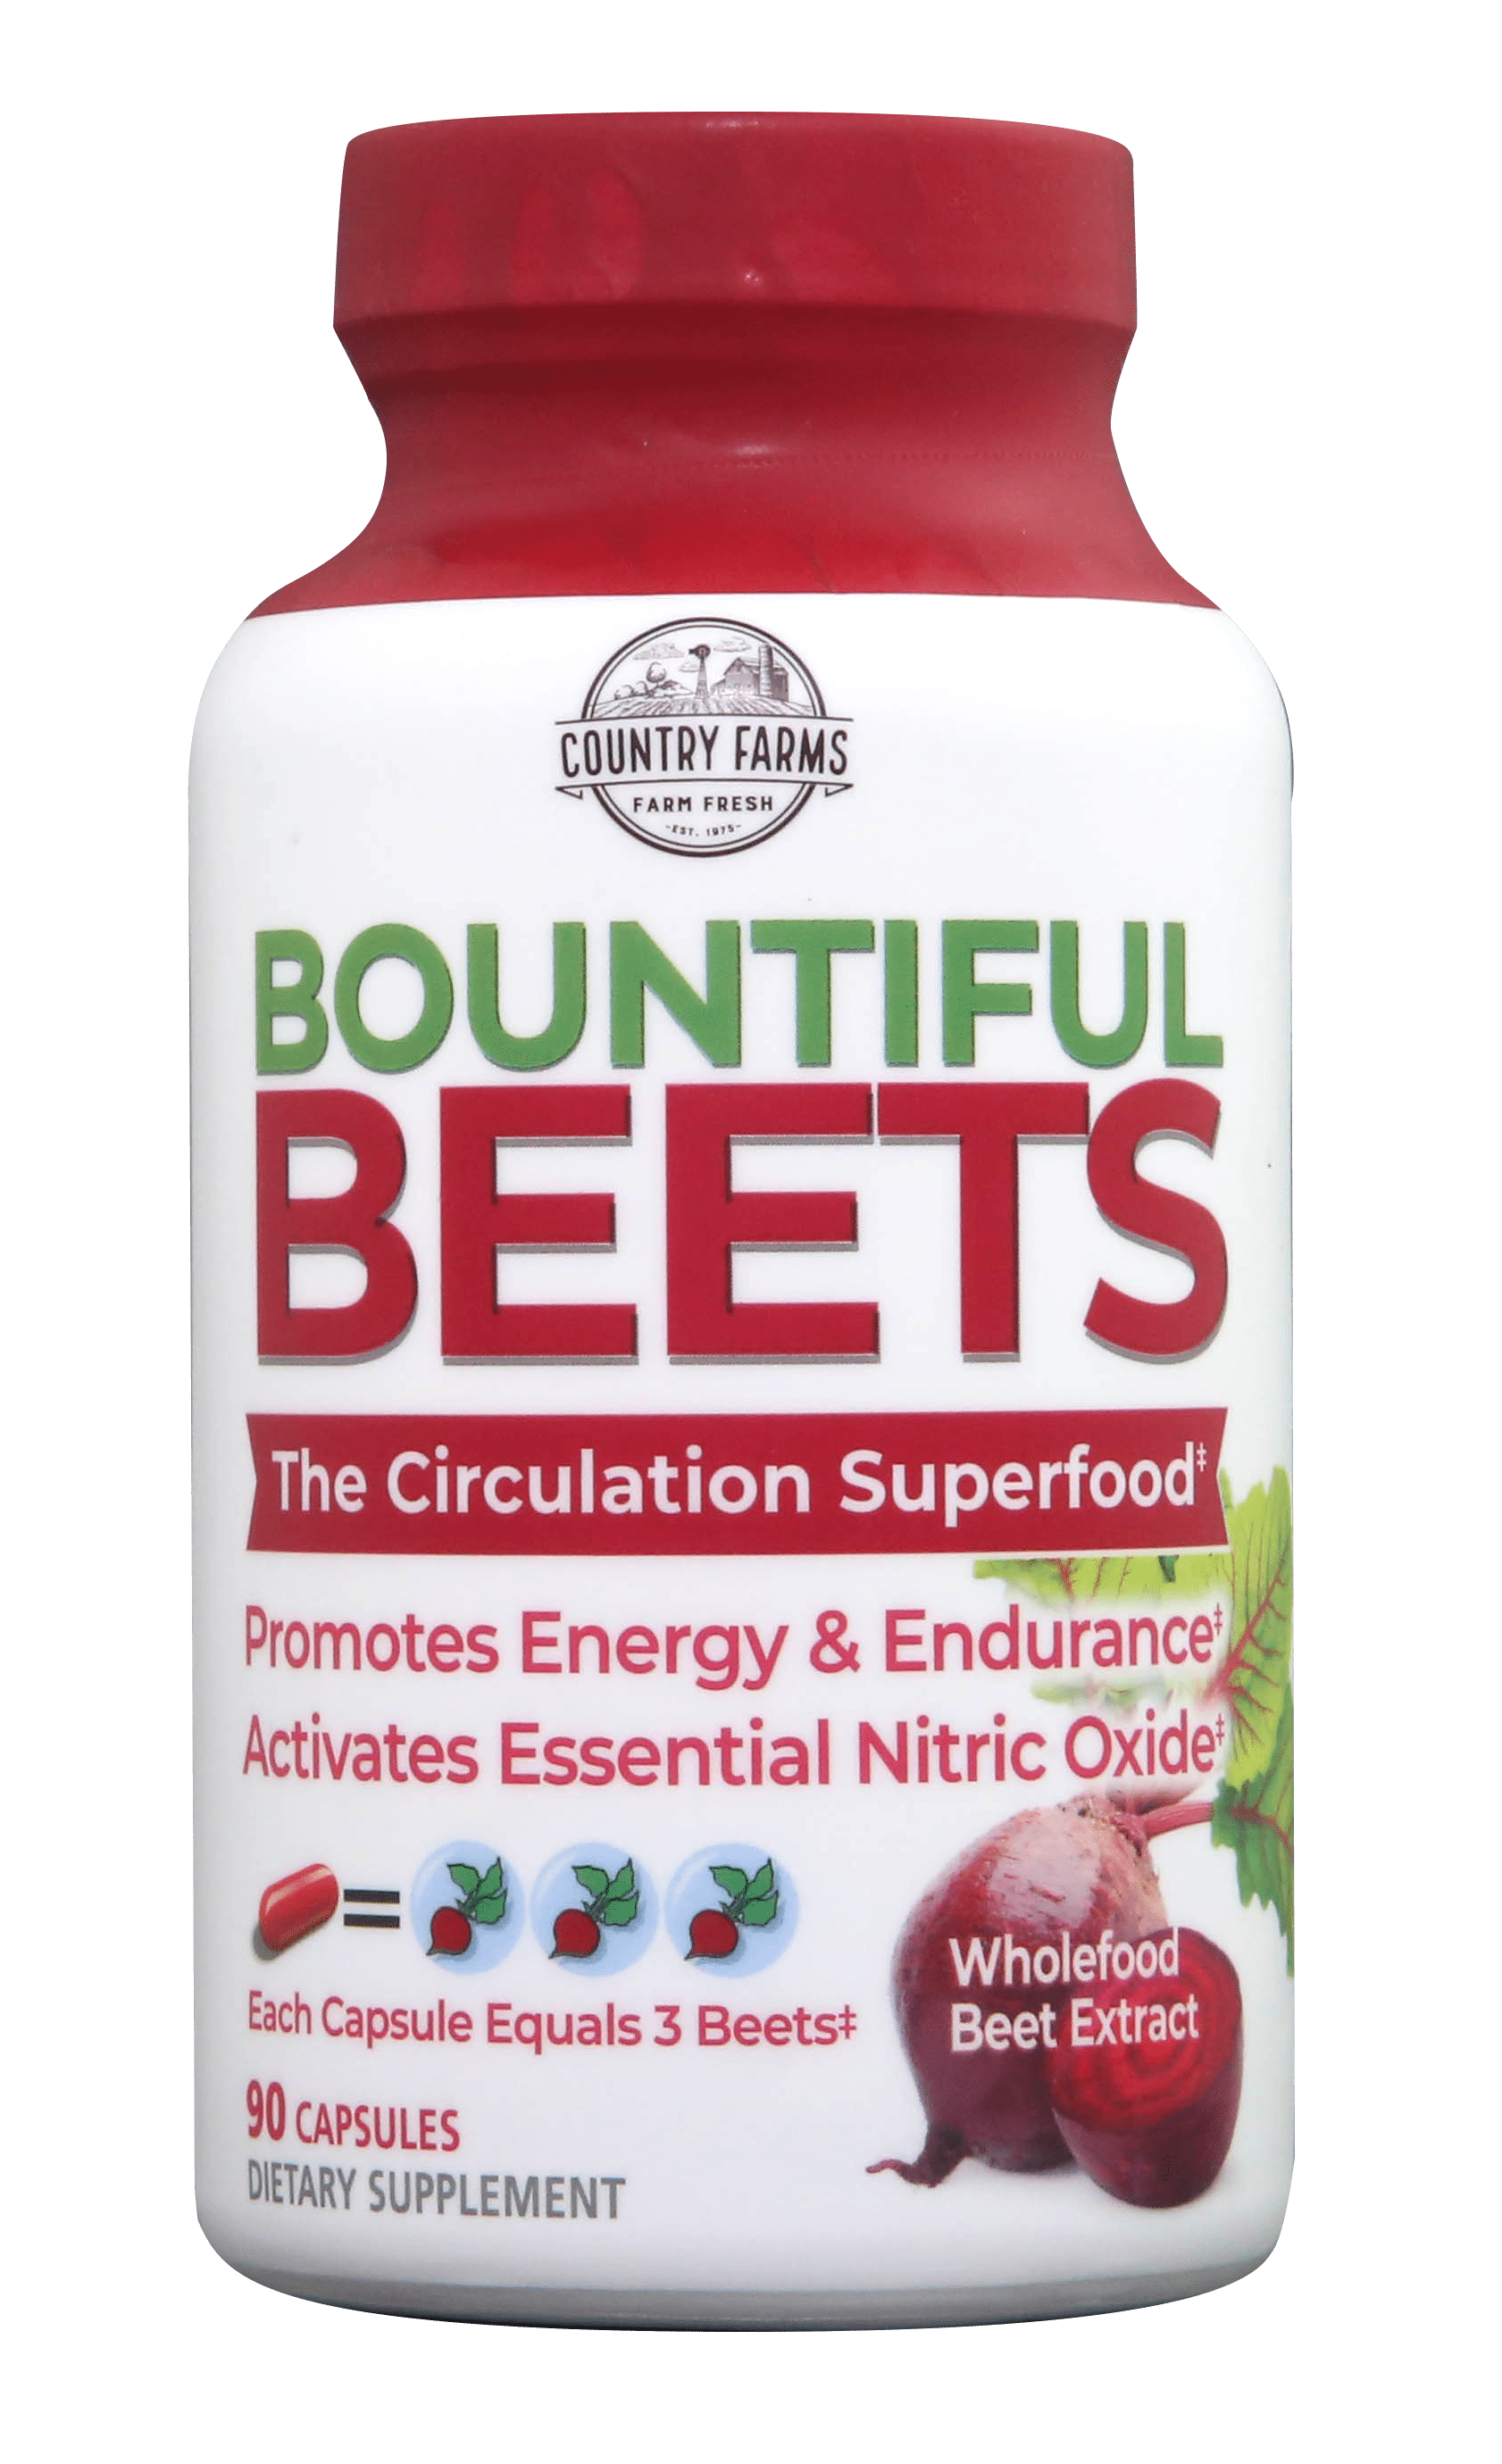 Country Farms Bountiful Beets Capsules, Circulation Superfood, Real Beet Powder, Equals 3 Beets, Antioxidant, Promotes Natural Energy, 90 ct